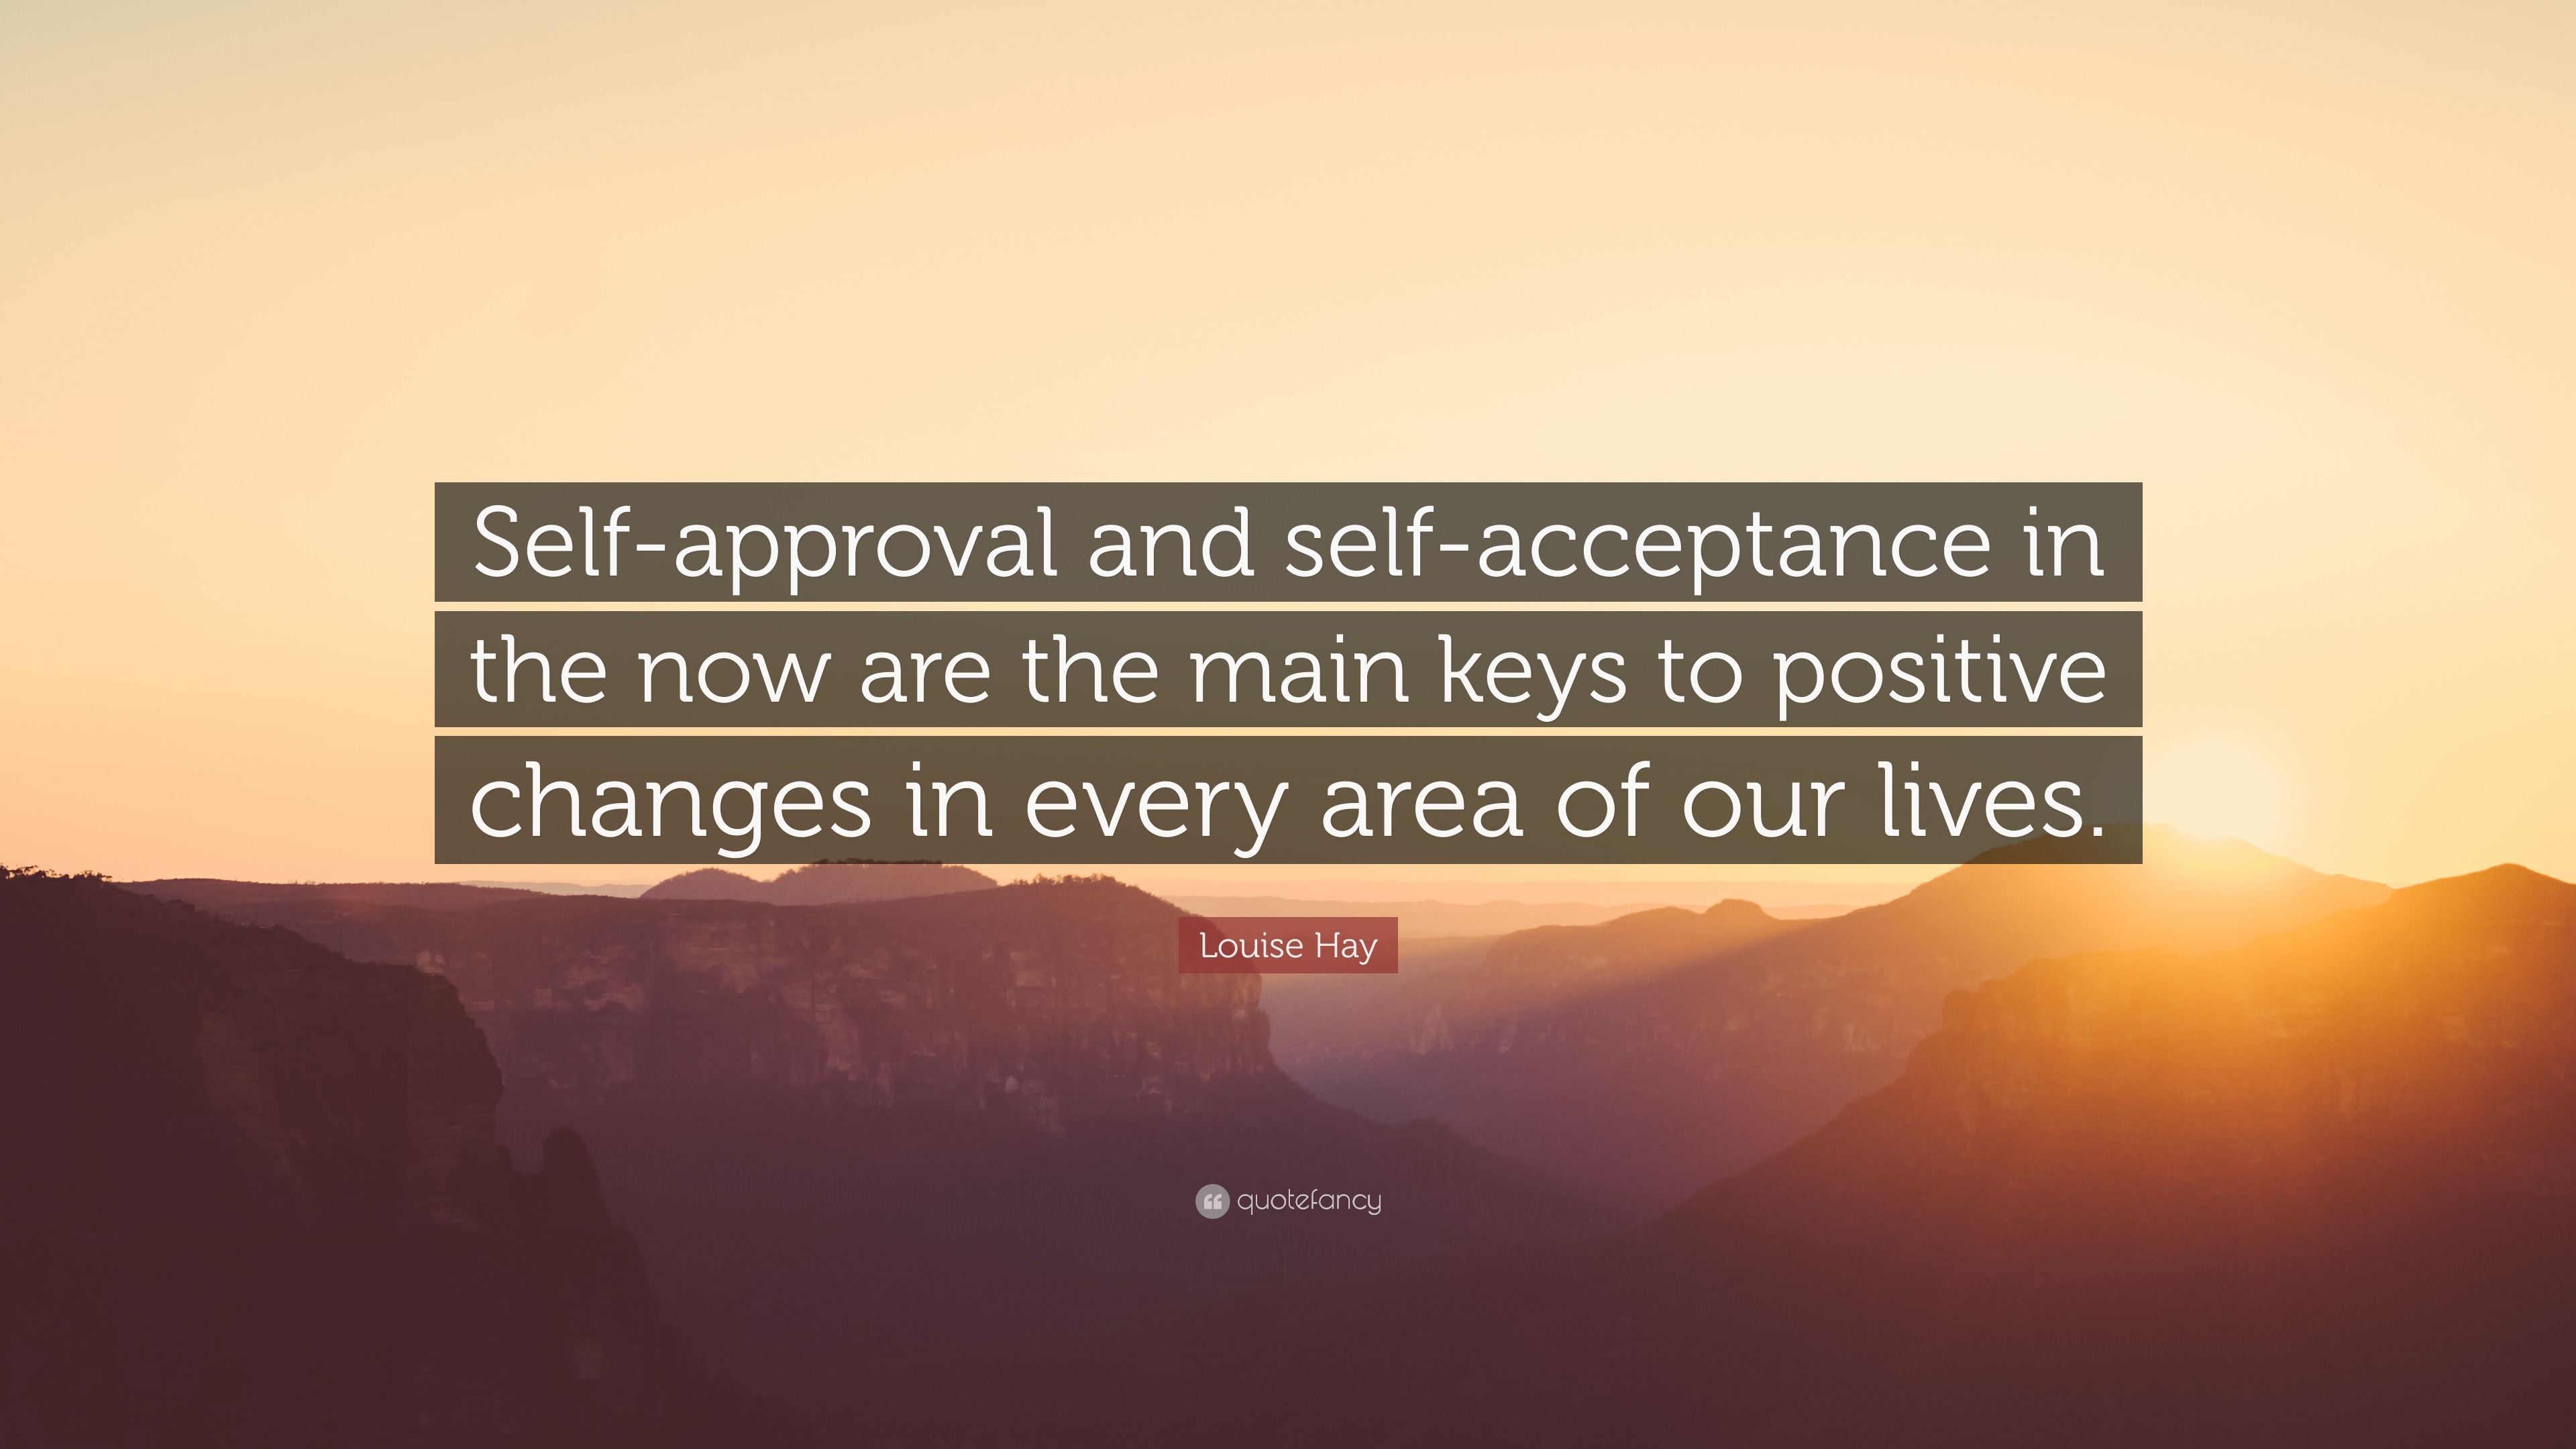 Louise Hay Quote: “Self-approval and self-acceptance in the now are the ...